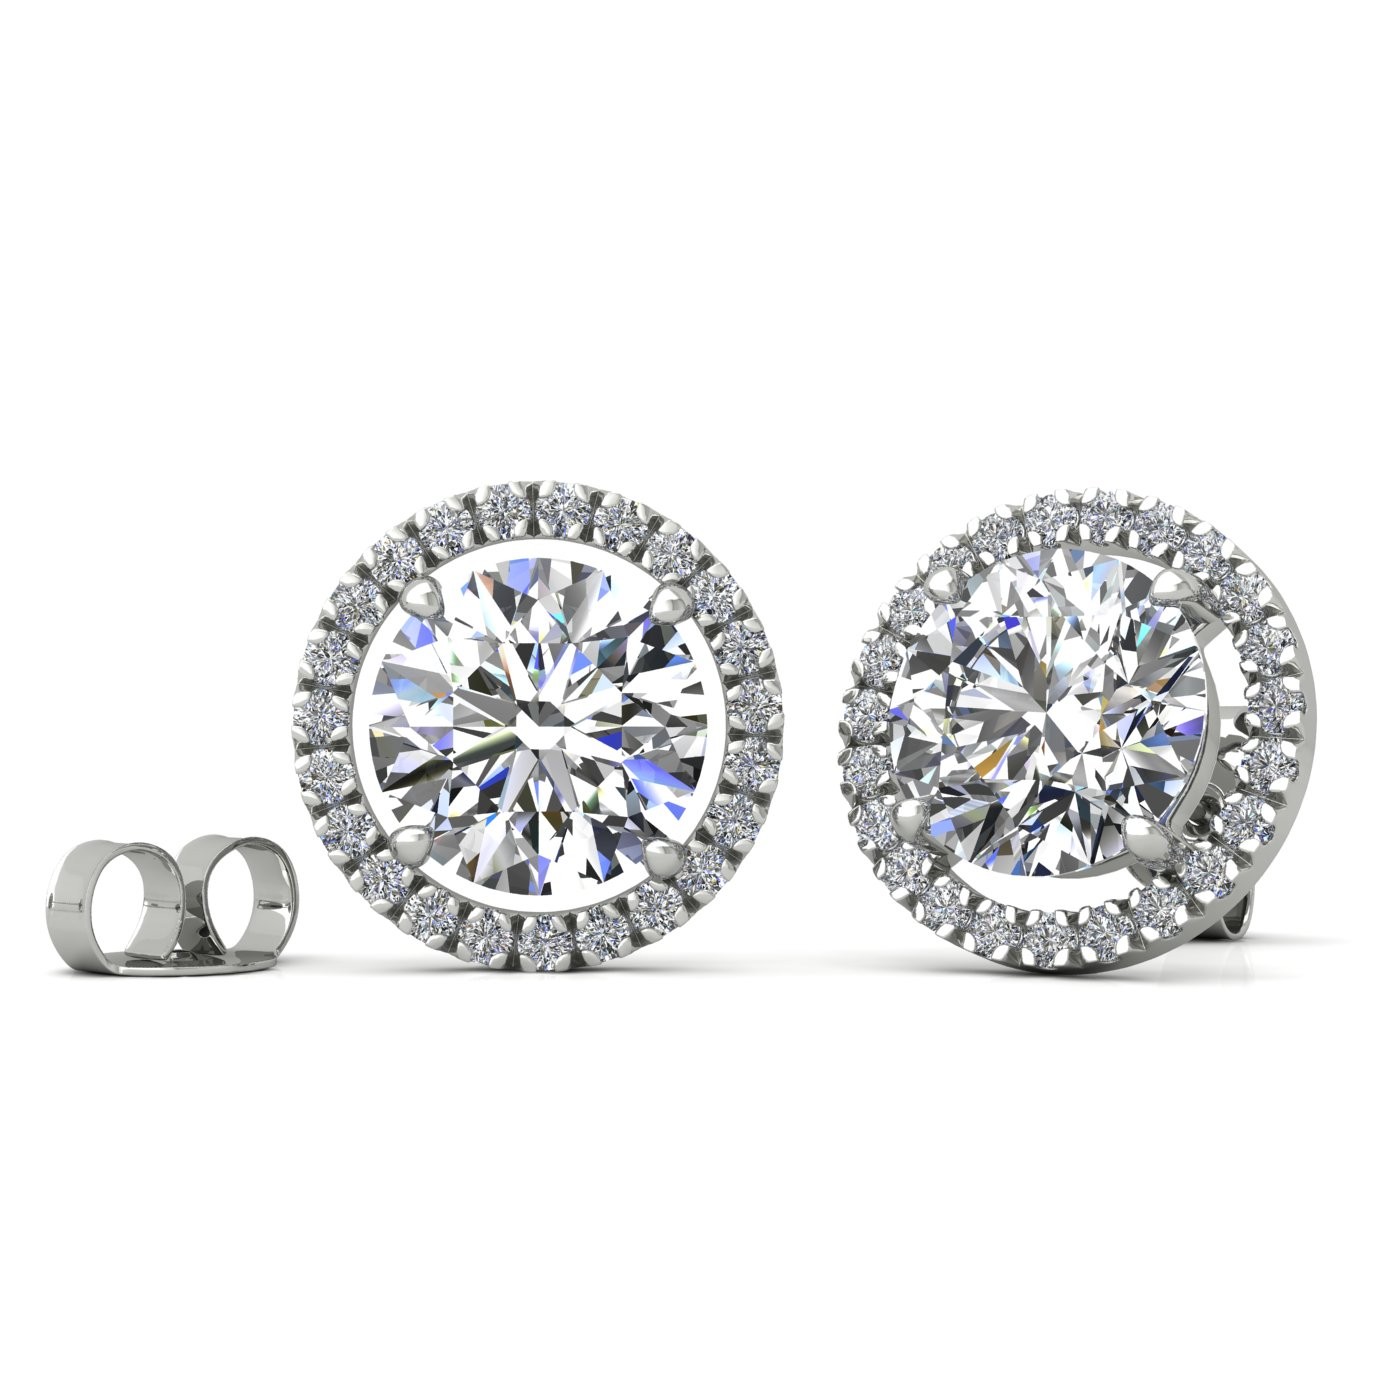 18k white gold 1 ct each (2 tcw) 4 prongs round brilliant cut halo diamond earring studs Photos & images